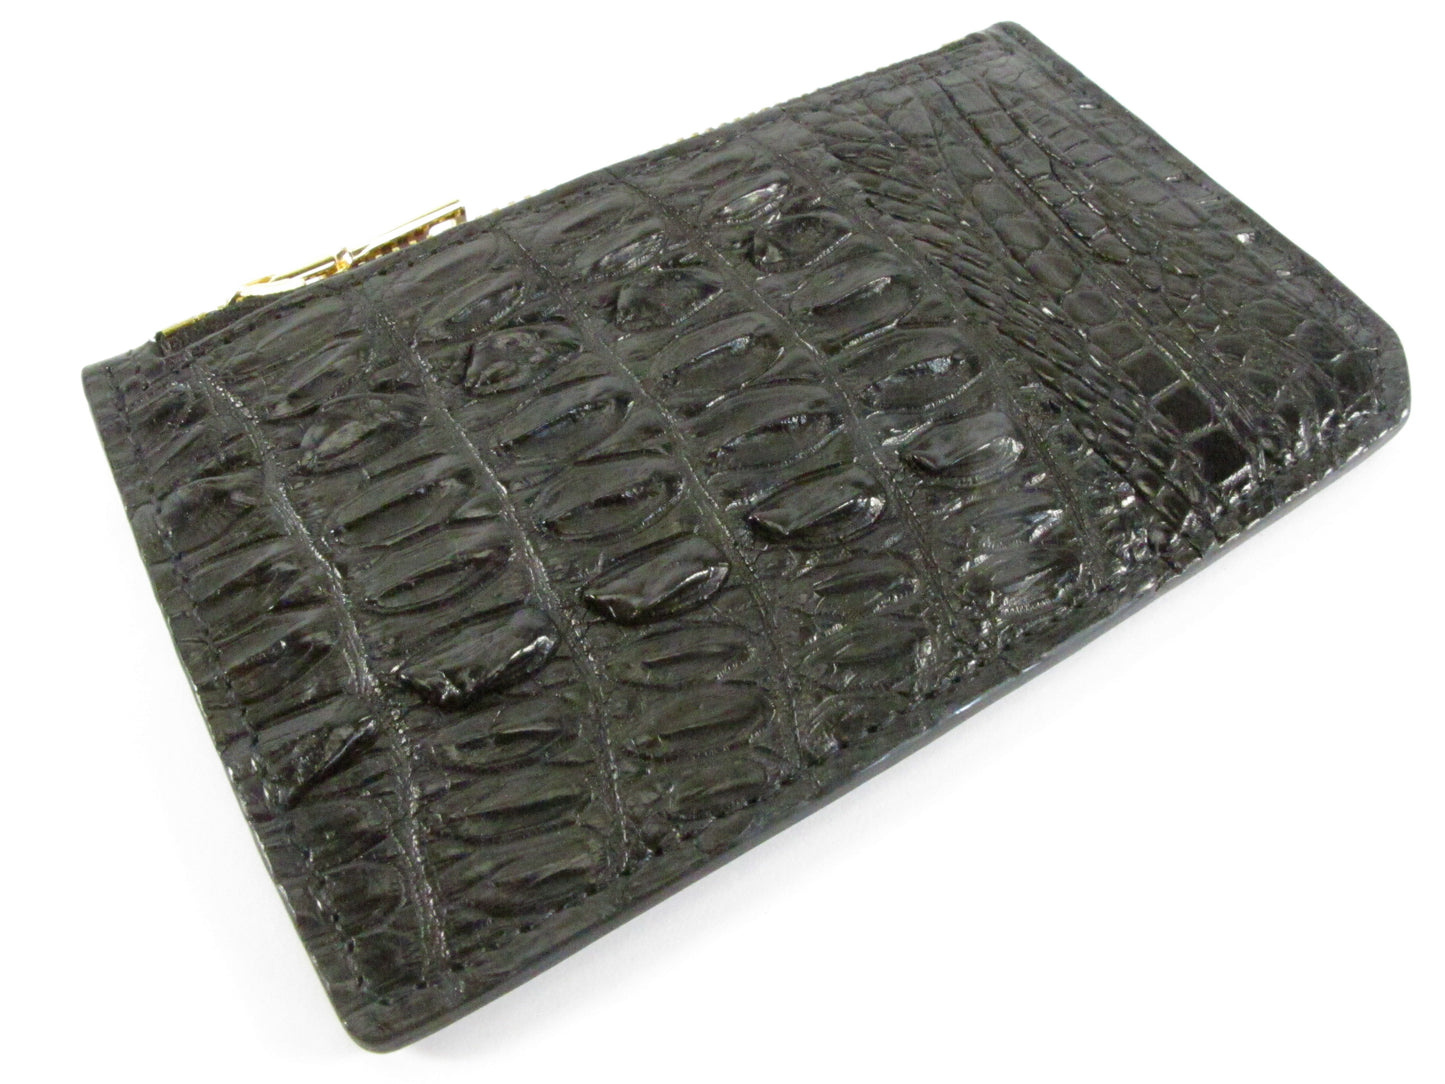 Genuine Crocodile Tail Skin Leather Business & Credit Card Holder Zip Wallet Coins Purse